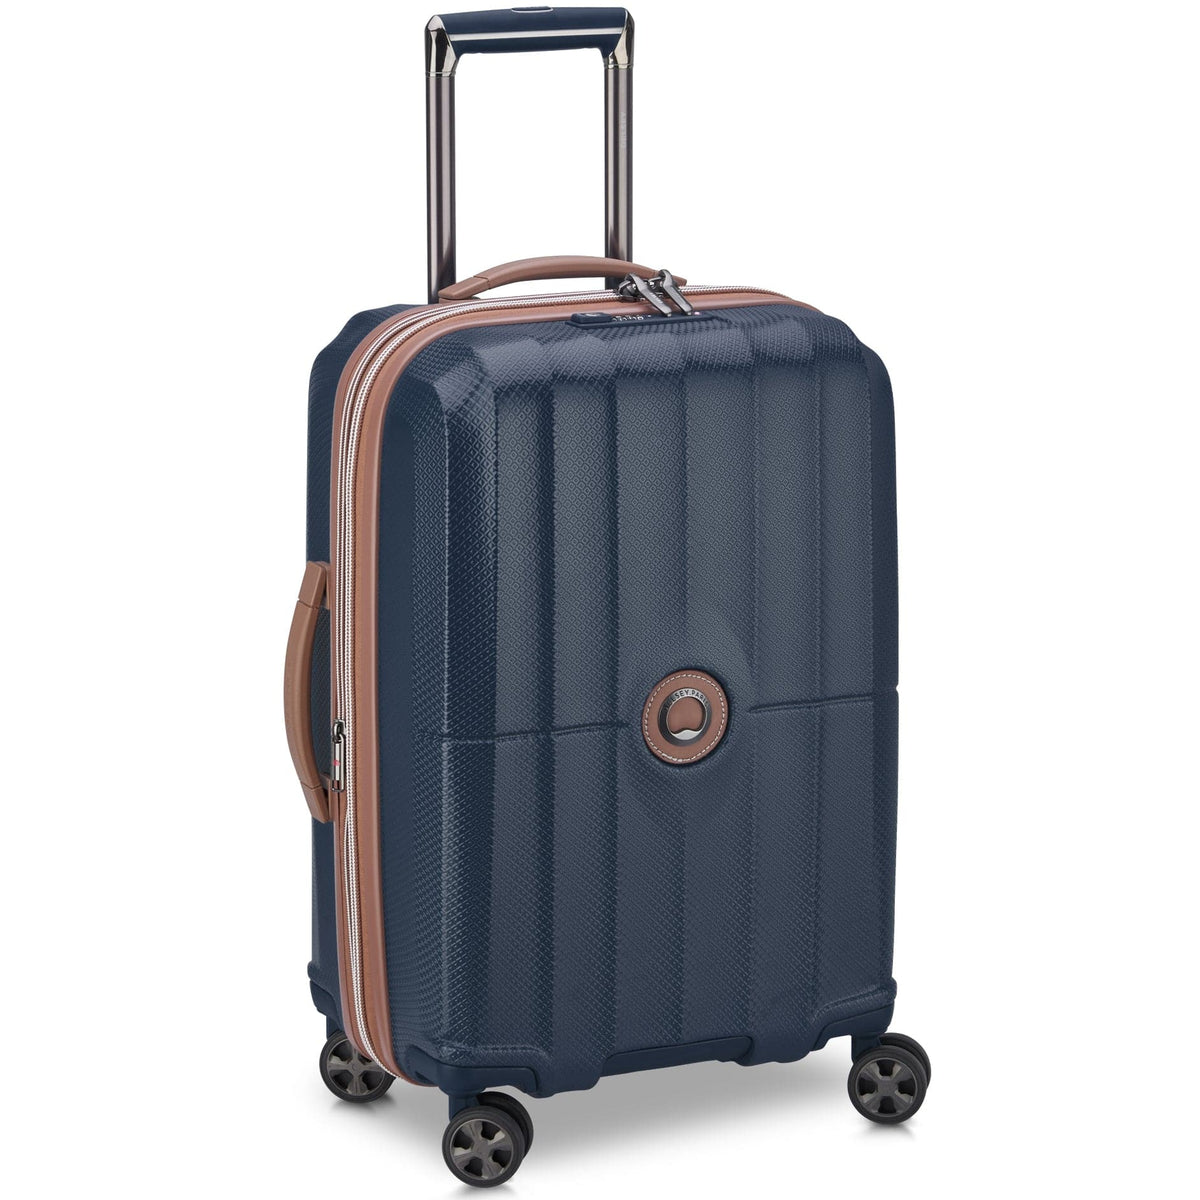 Delsey ST. Tropez Hardside Spinner Carry-On Luggage - 21" Small